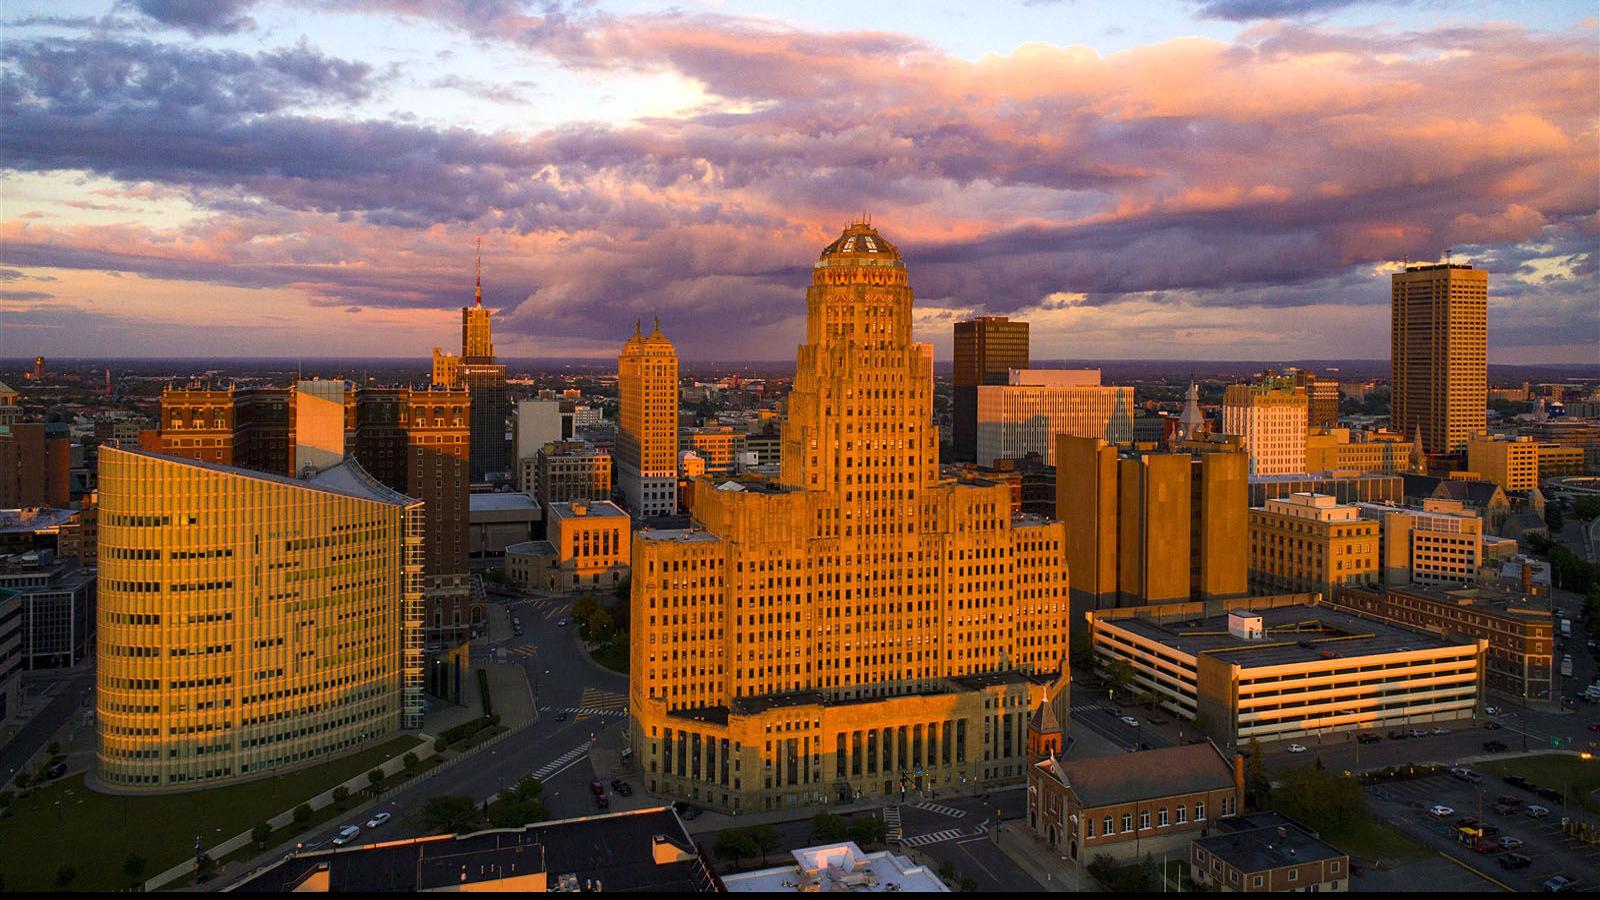 Buffalo's population on the rise as 2020 census approaches, mayor says | Local News